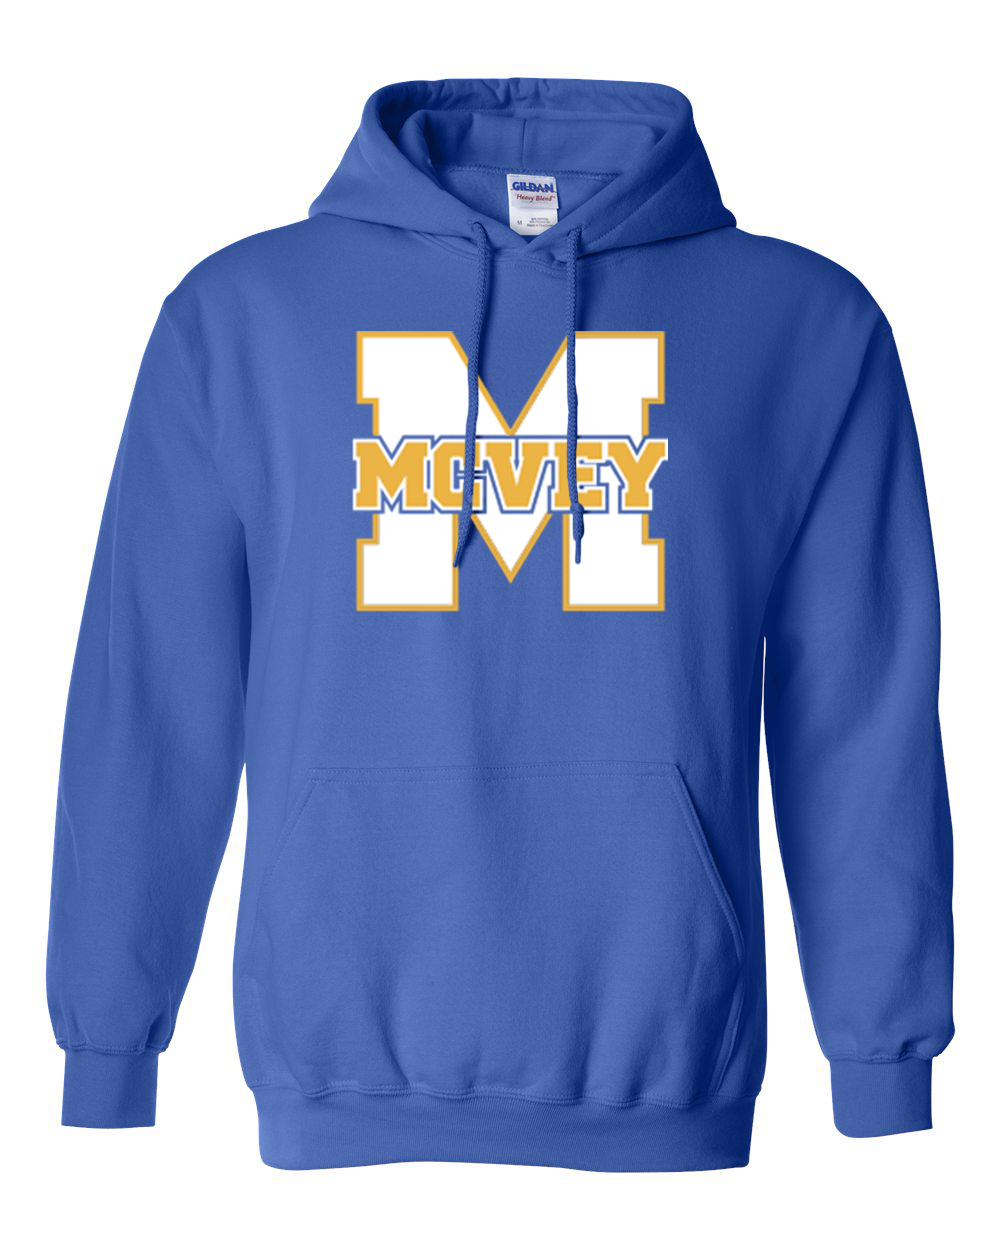 MCVEY Youth/Adult Pullover Hoodie, Royal Blue